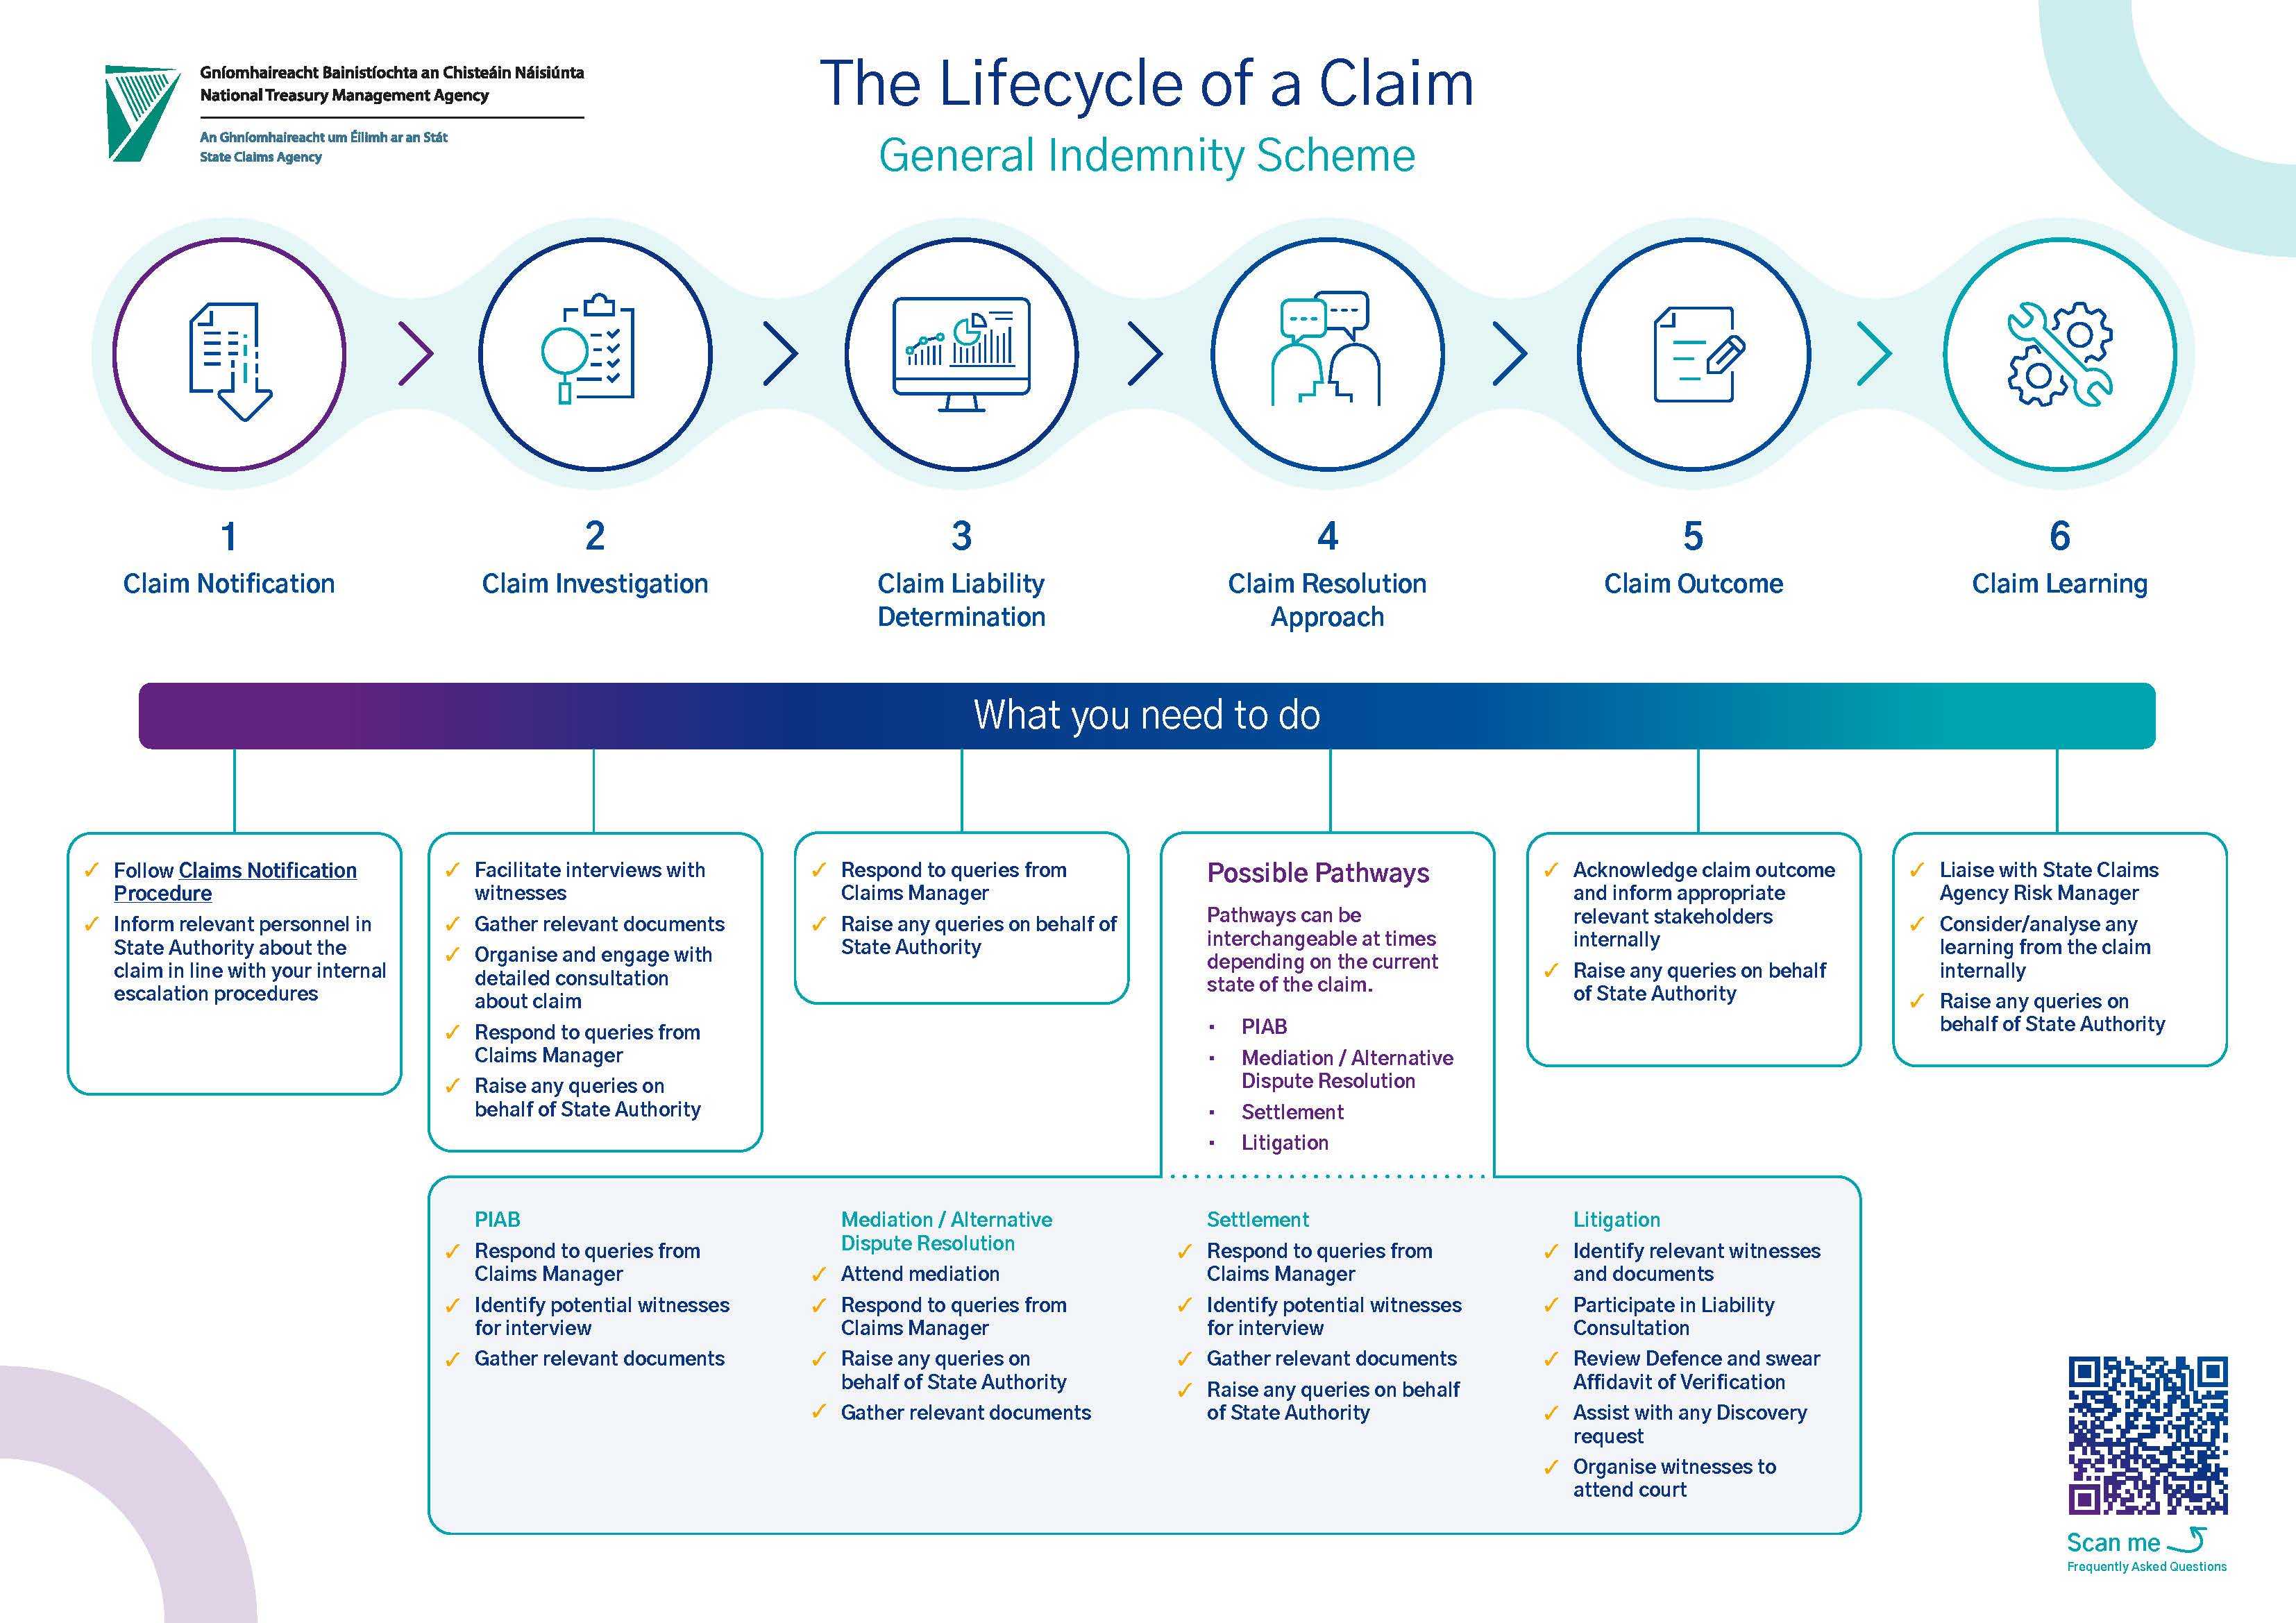 General Indnemnity Scheme - Lifecycle of a Claim